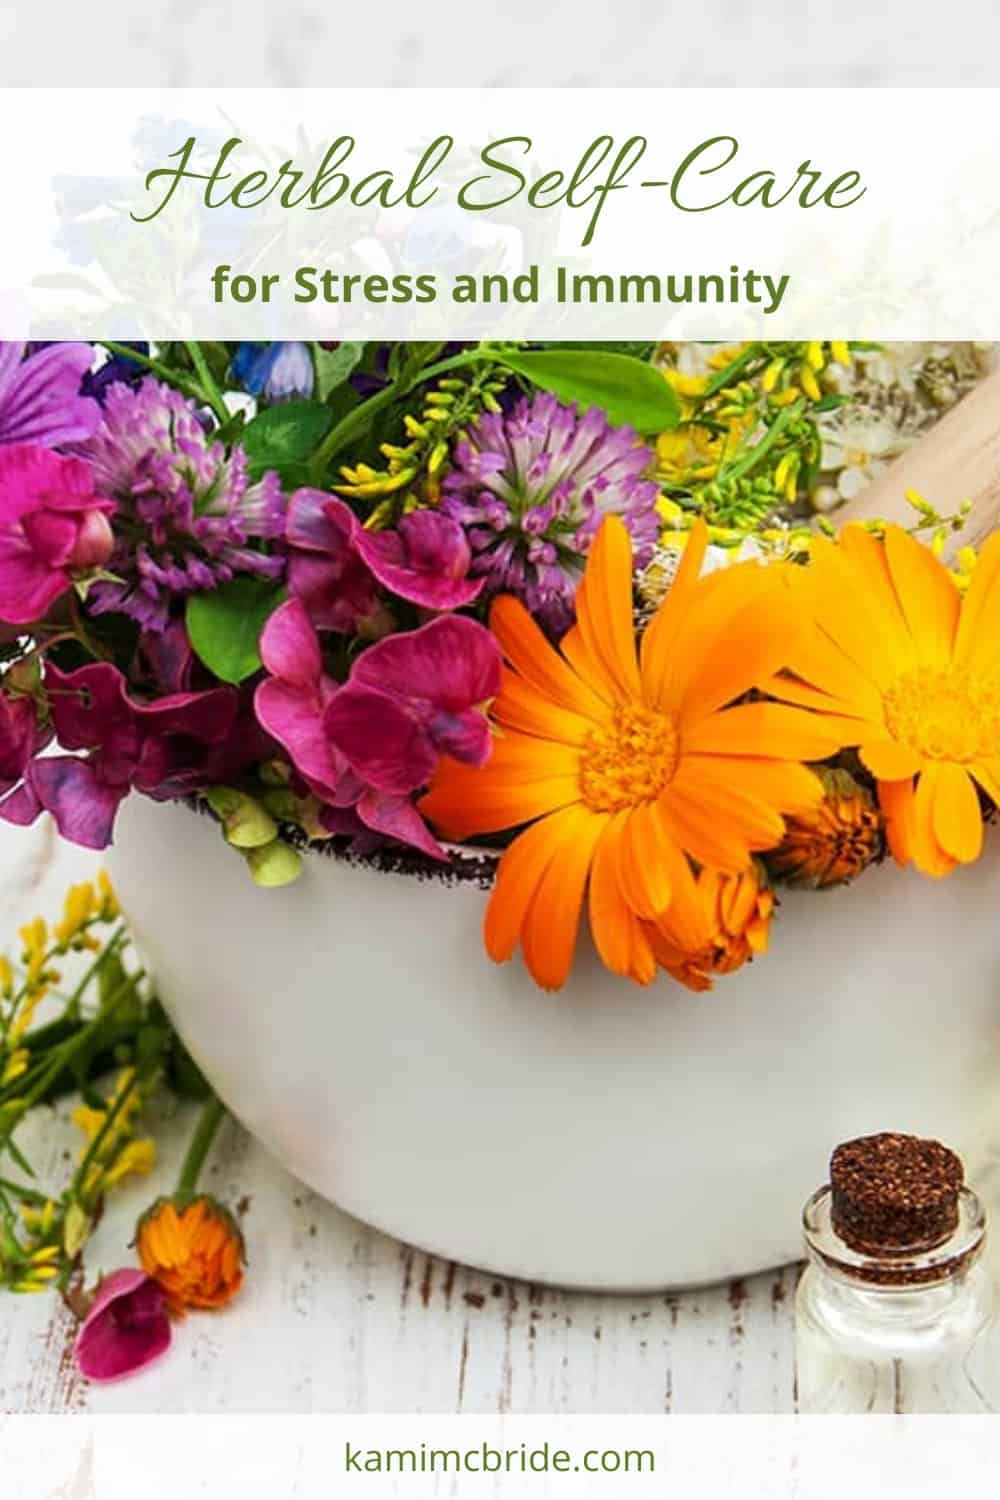 Herbal Self-Care Techniques for Stress and Immunity